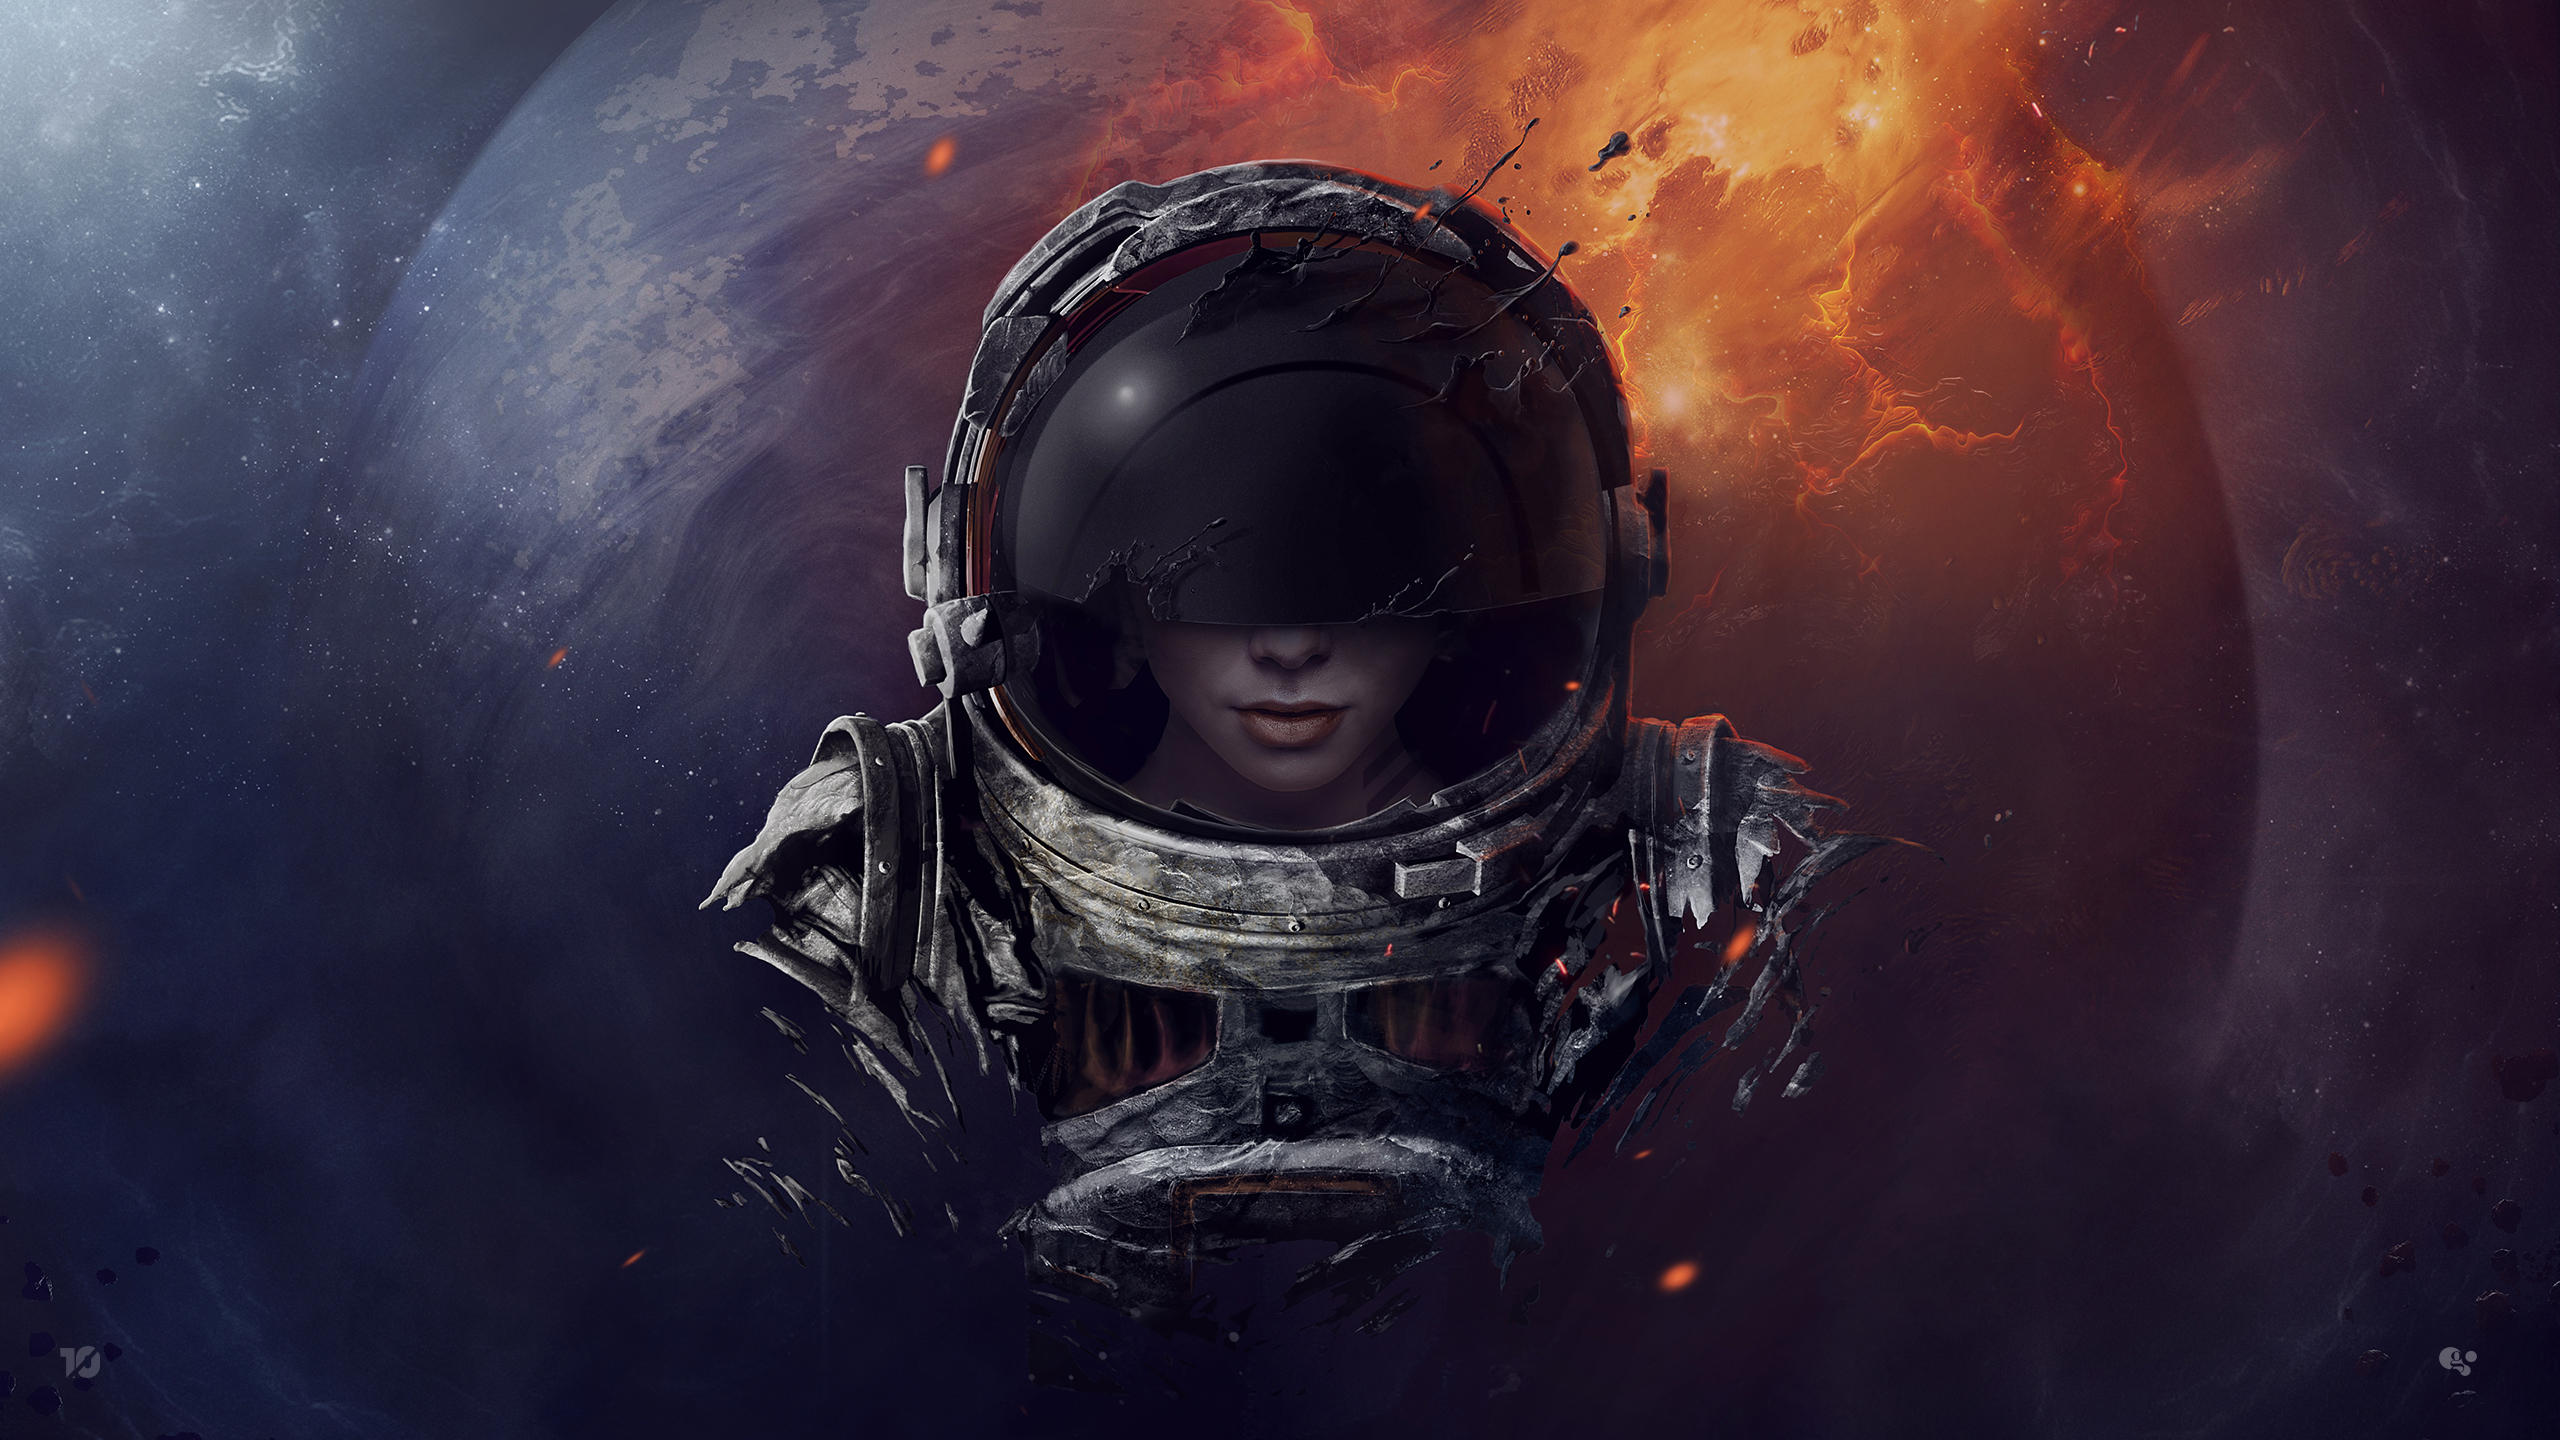 General 2560x1440 astronaut space fantasy art planet spacesuit abstract surreal digital art drawing helmet space art futuristic science fiction women science fiction artwork fictional character women frontal view visors